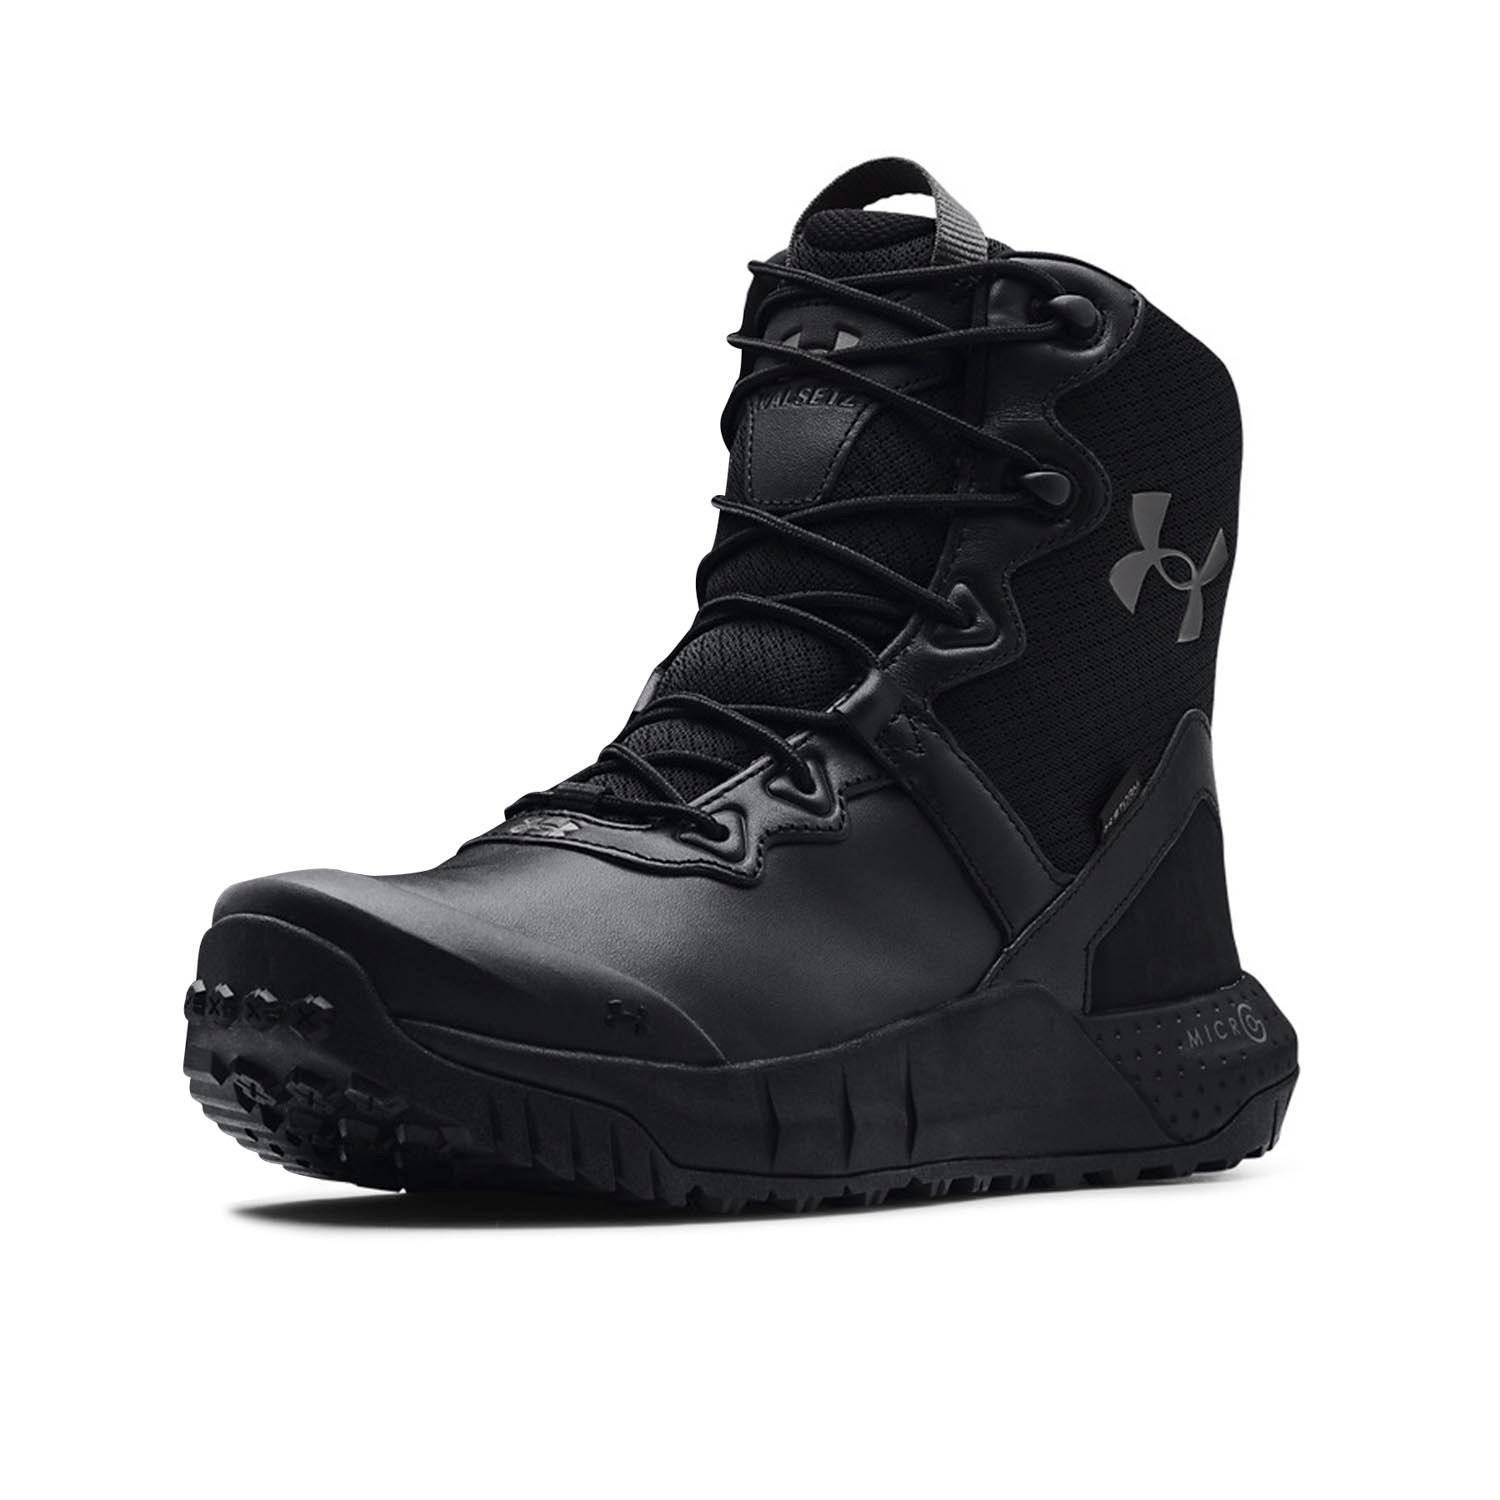 Under Armour Charged Valsetz Tall Waterproof Side Zip Men's Tactical Boot